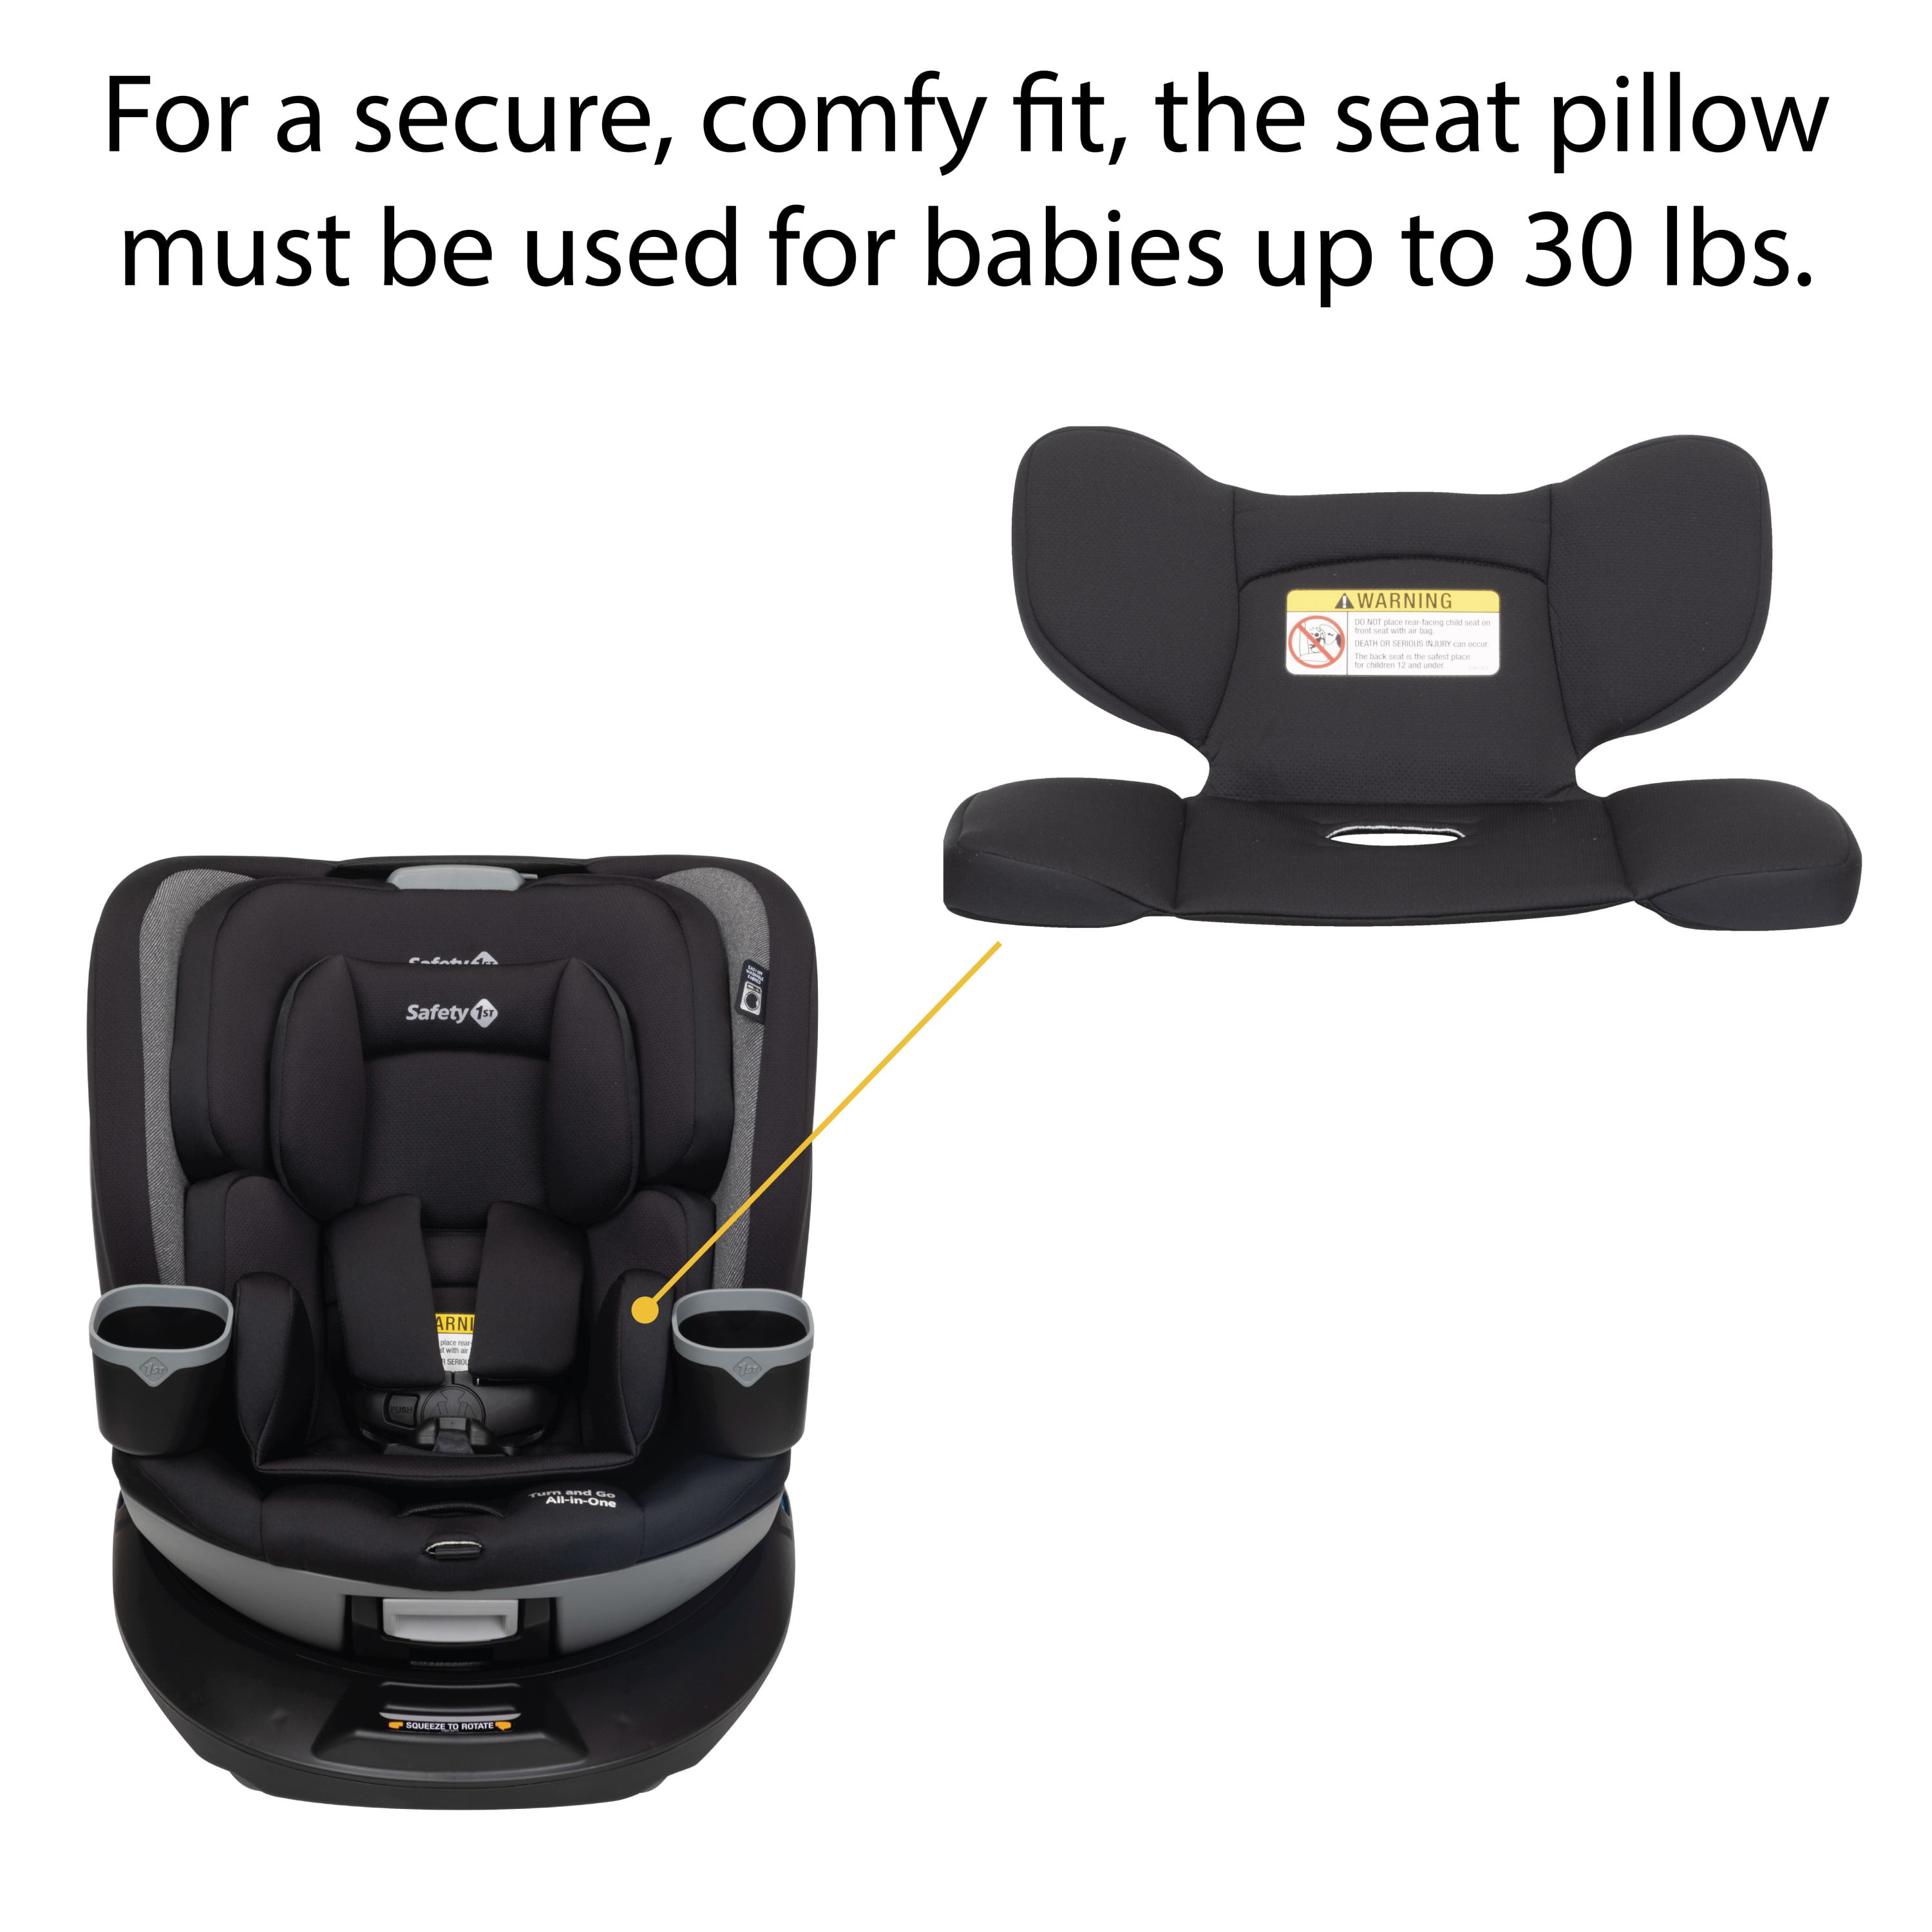 10 Tips For Bringing Your Car Seat on an Airplane » Safe in the Seat